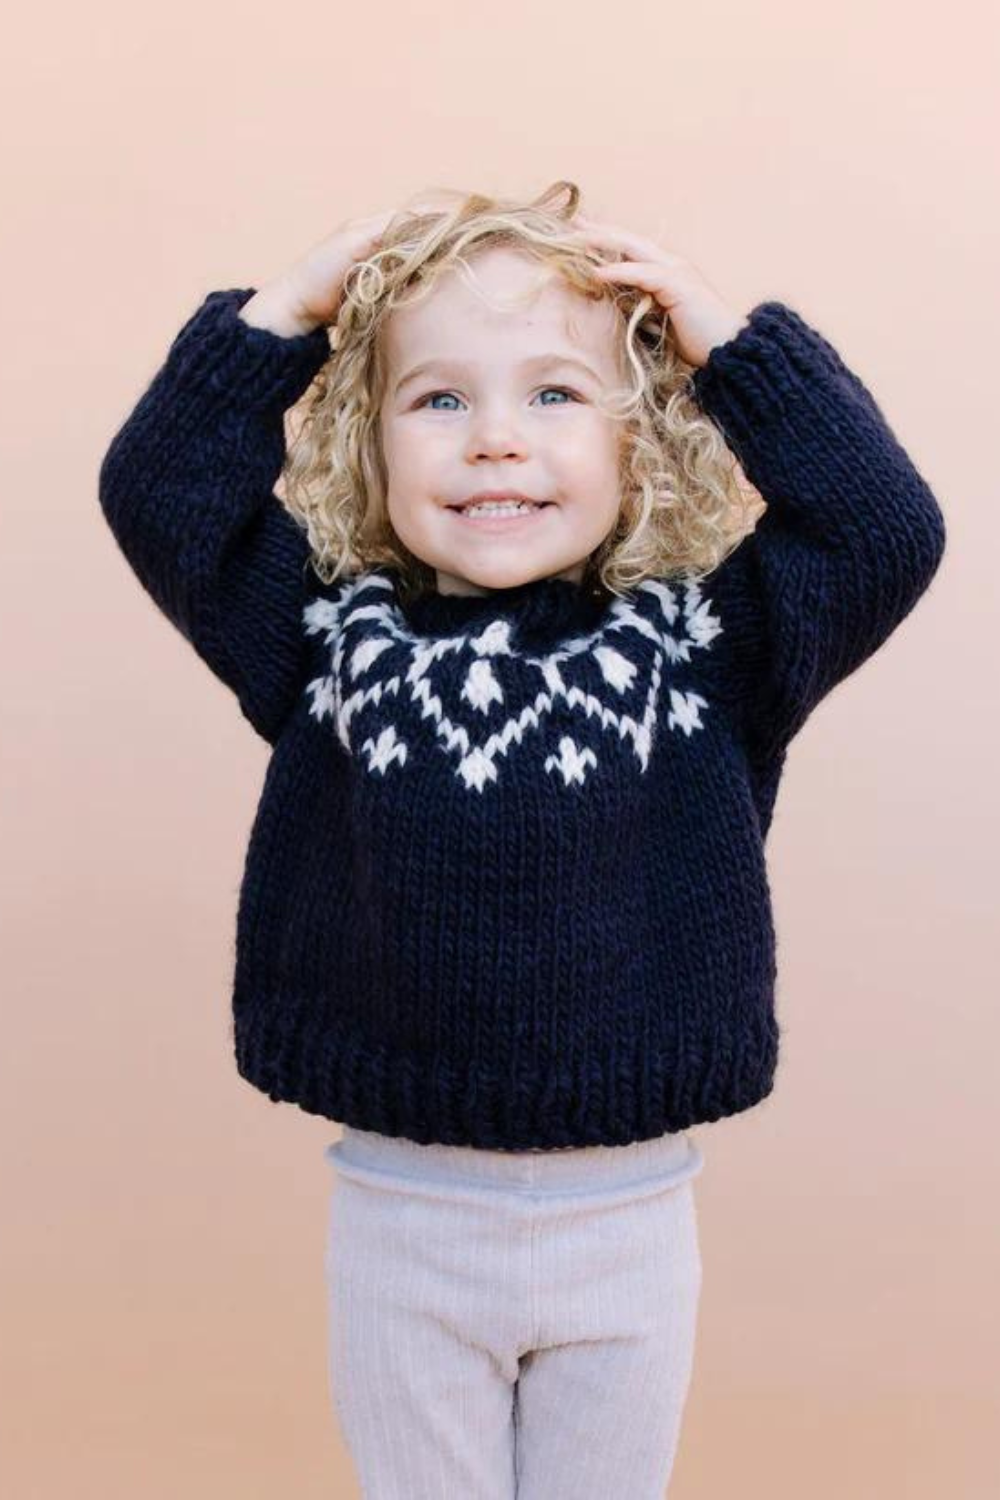 Blueberry Hill Baby Icicle Sweater - Navy